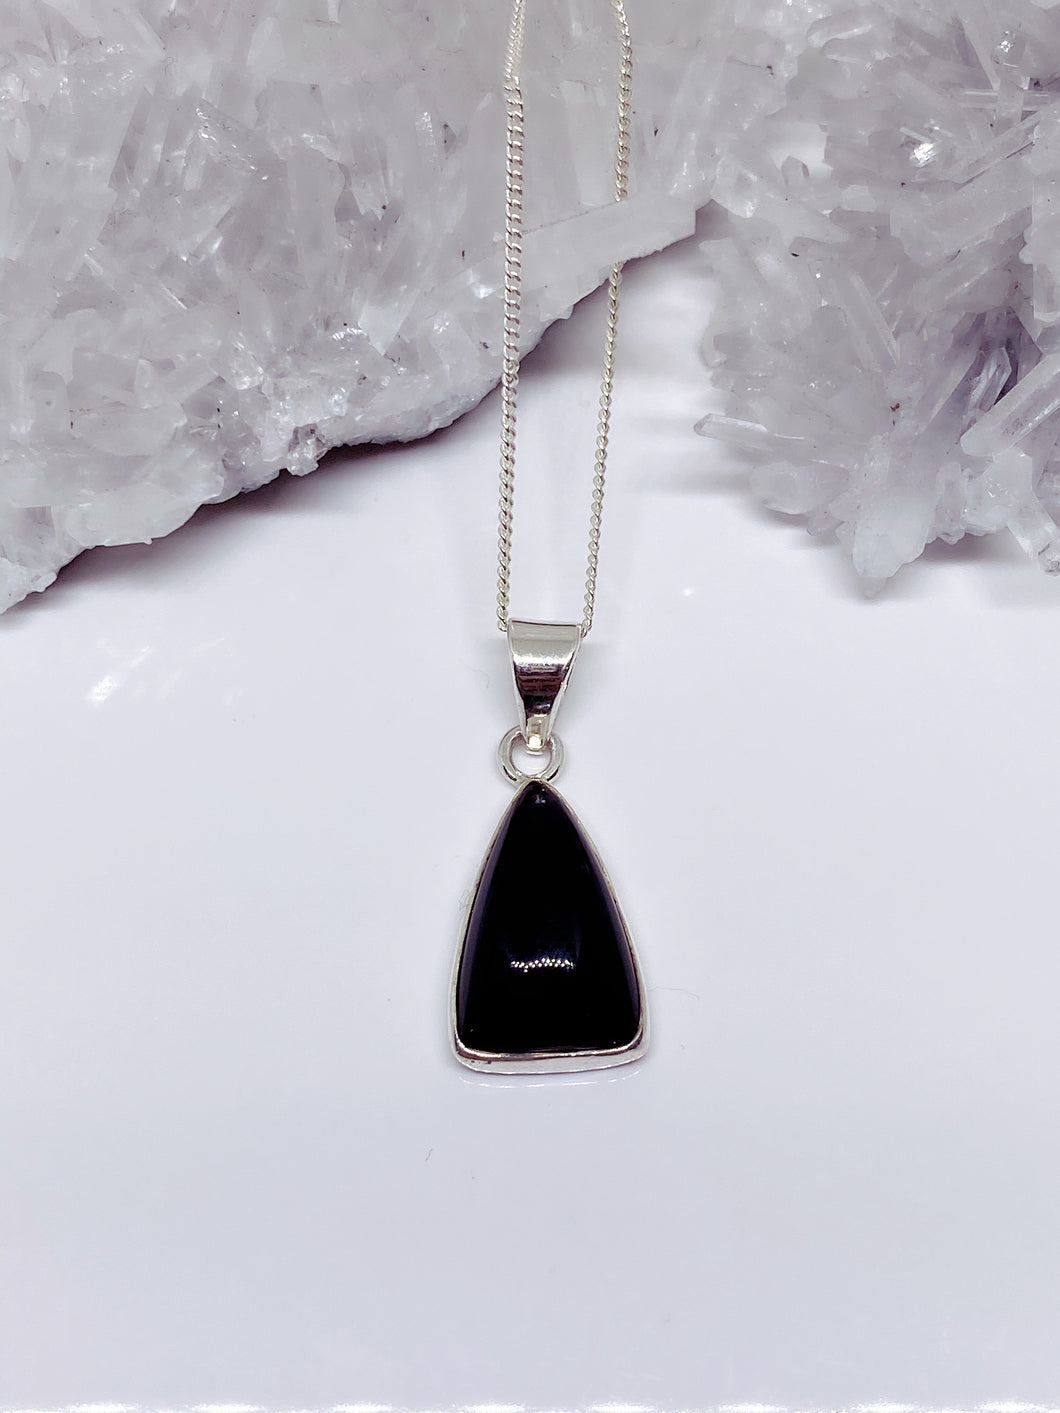 Black Onyx Pendant - Sterling Silver with Chain